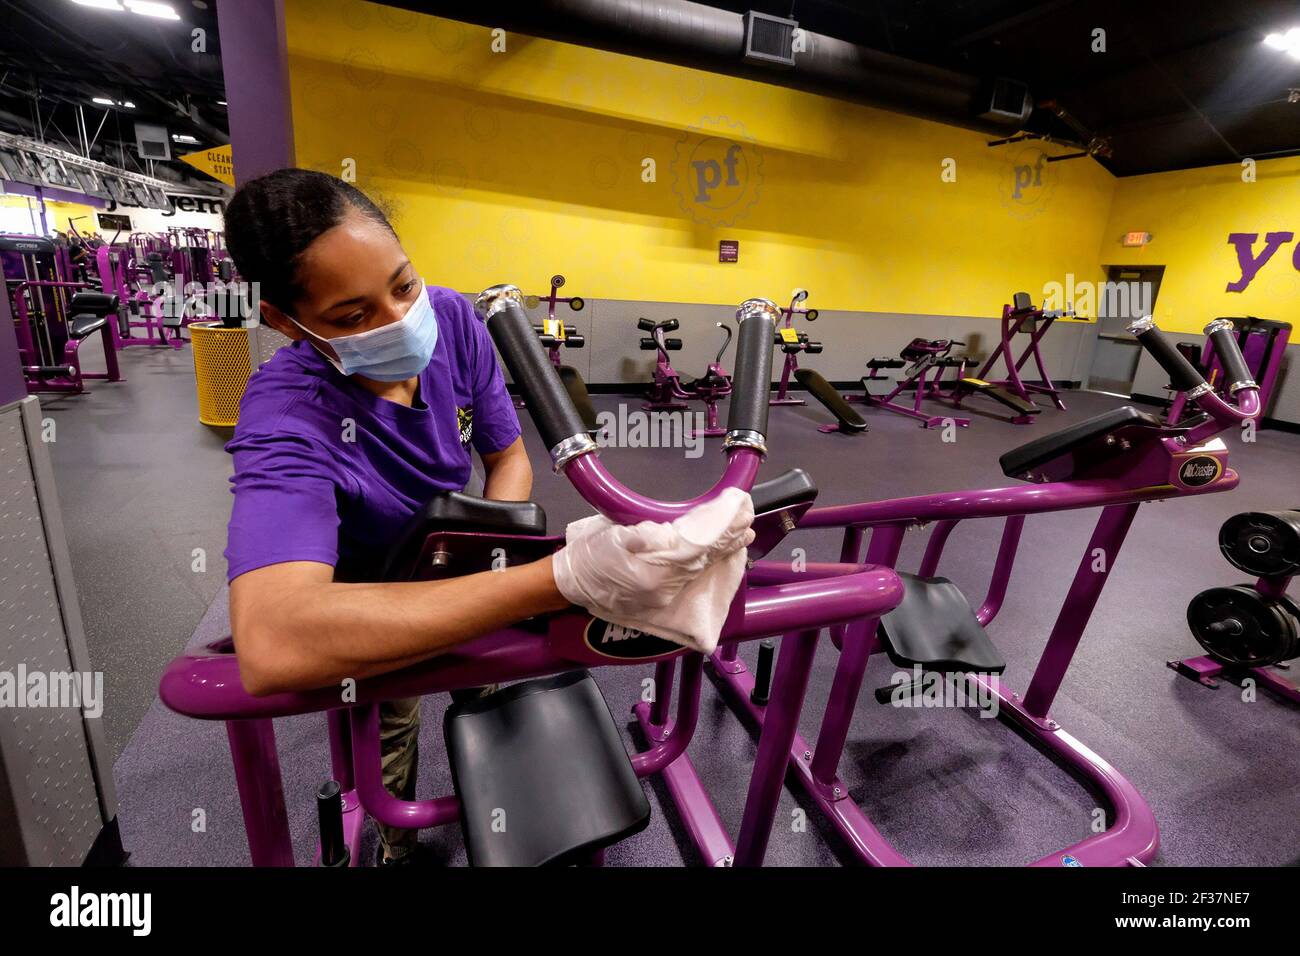 https://c8.alamy.com/comp/2F37NE7/inglewood-california-usa-15th-mar-2021-a-planet-fitness-staff-cleans-gym-equipment-to-prepare-the-reopening-after-being-closed-due-to-covid-19-pandemic-los-angeles-county-fitness-centers-are-able-to-reopen-all-gyms-at-limited-capacity-with-the-county-advancing-today-to-the-less-restrictive-red-tier-of-the-state-credit-ringo-chiuzuma-wirealamy-live-news-2F37NE7.jpg